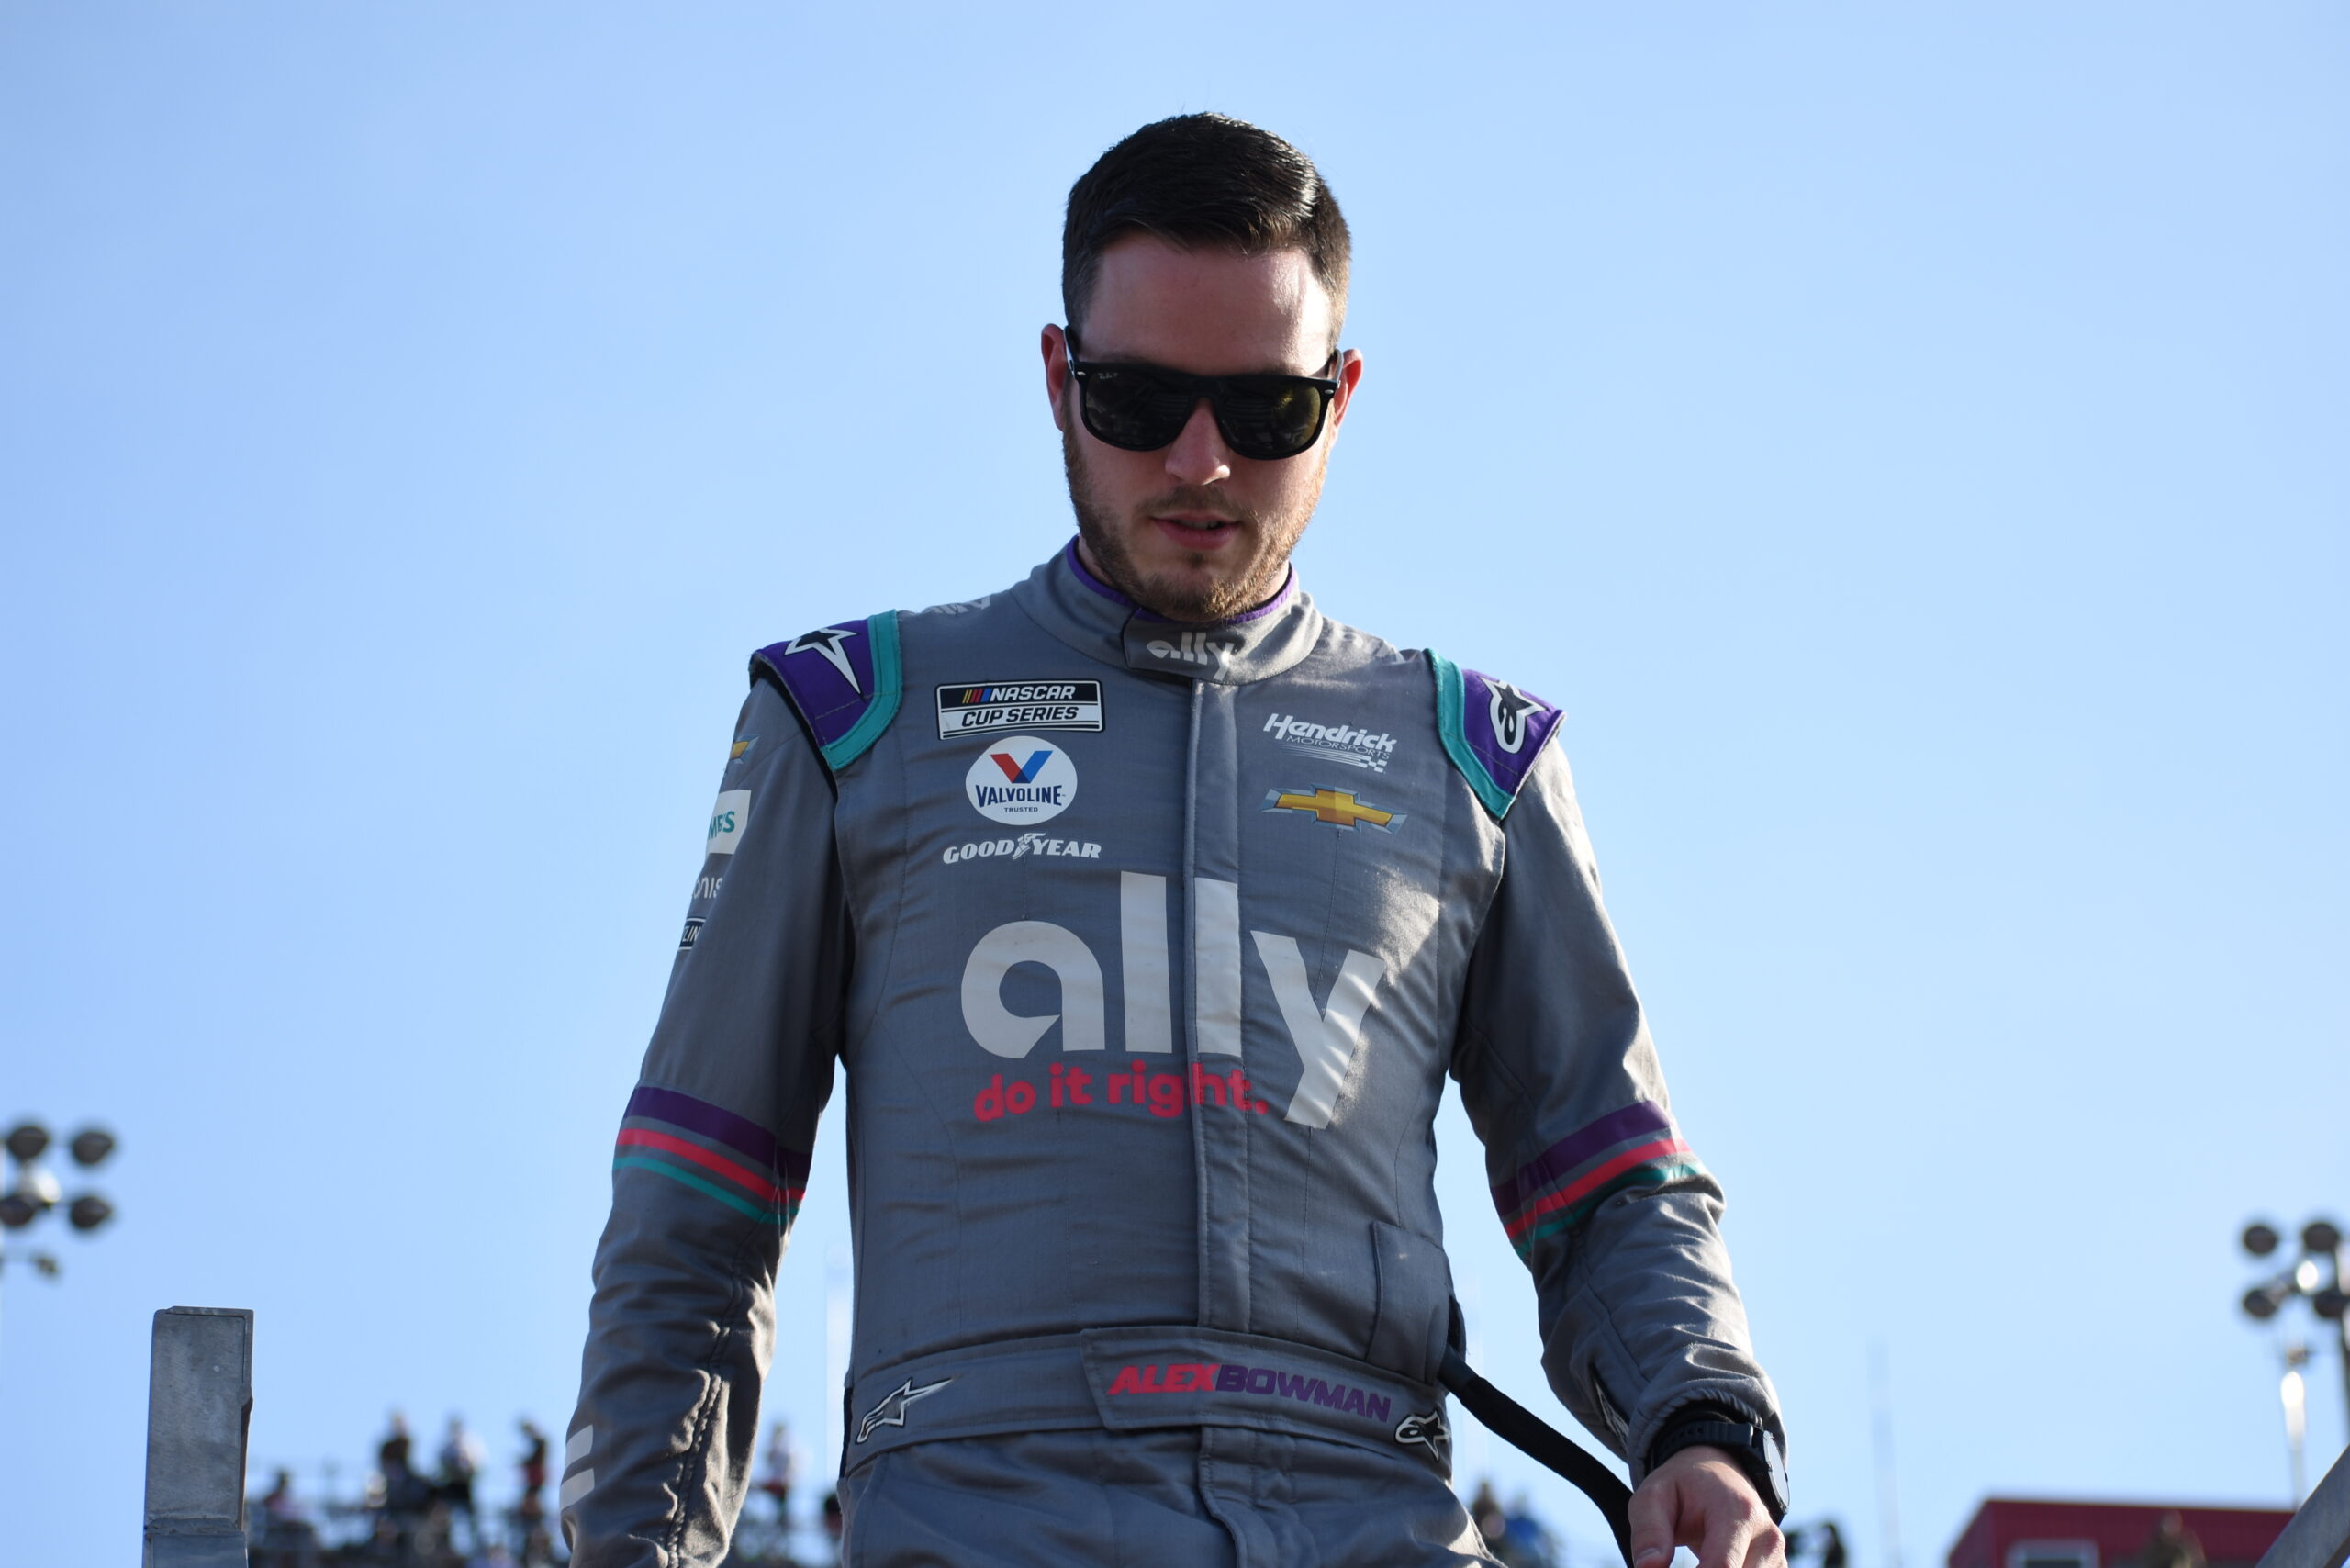 In the words of Ringo Starr, perhaps Alex Bowman knows the Playoffs "don't come easy." (Photo: Michael Guariglia | The Podium Finish)